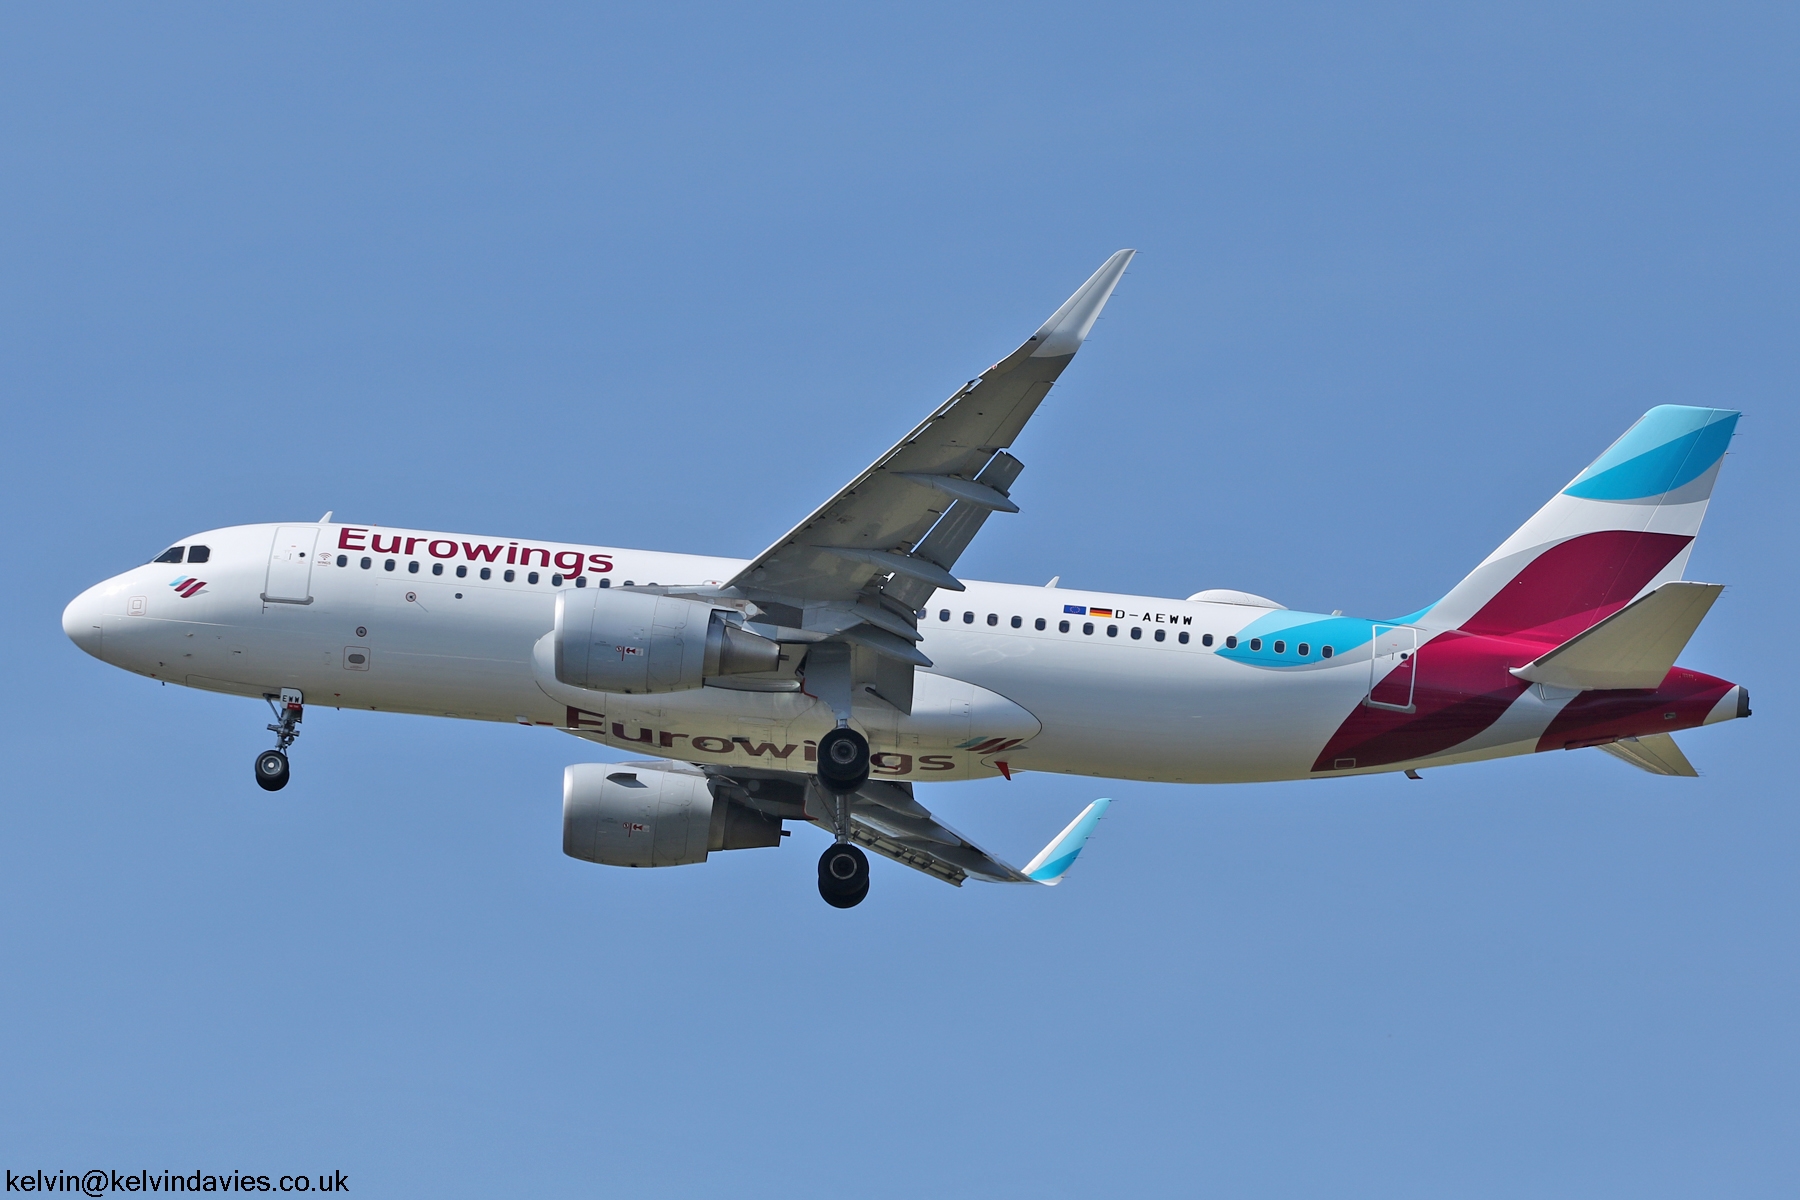 Eurowings A320 D-AEWW